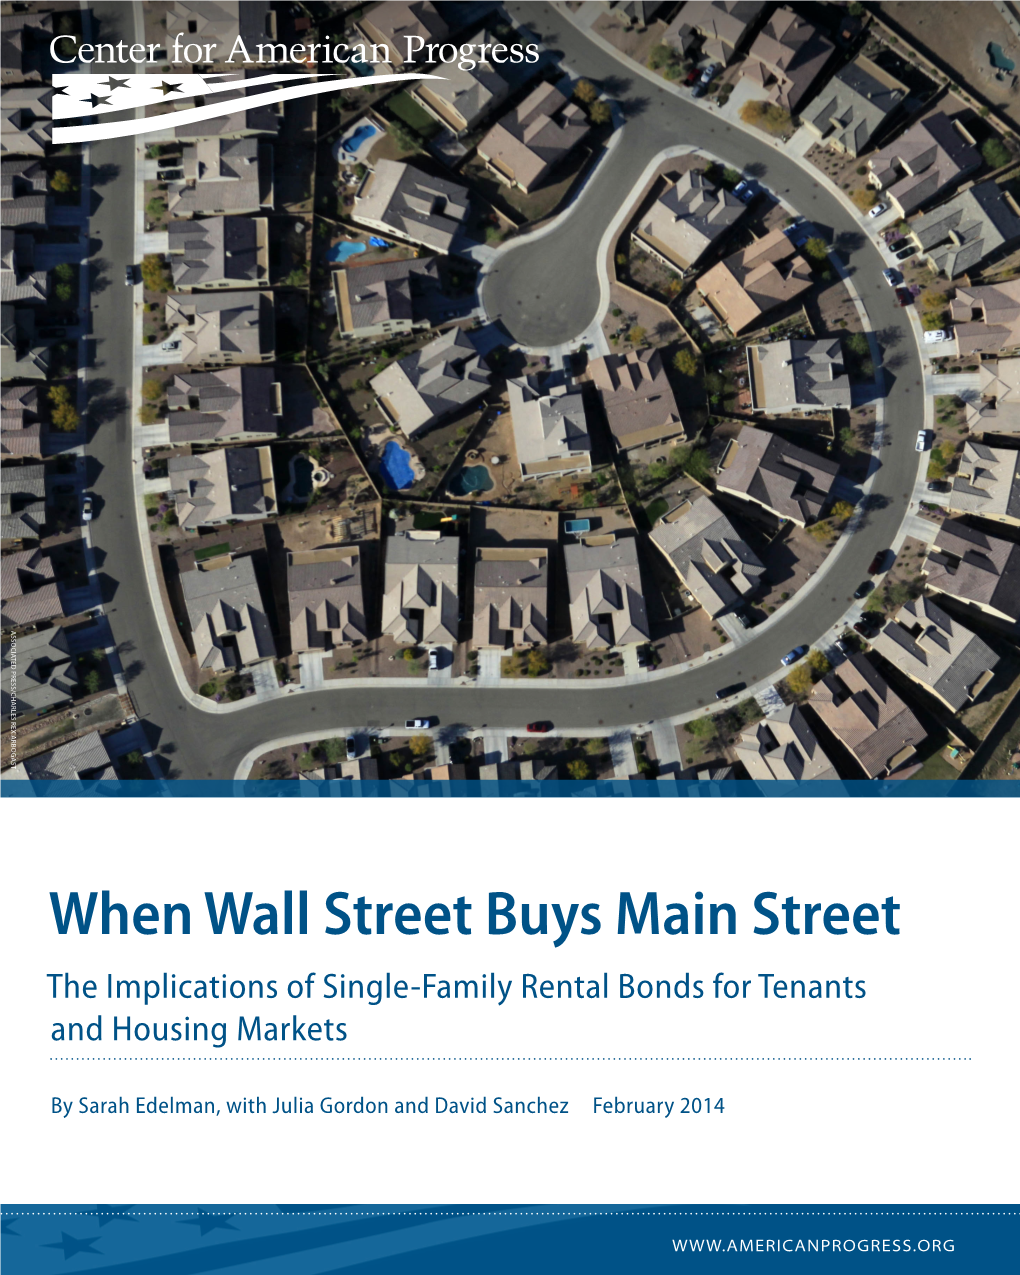 When Wall Street Buys Main Street the Implications of Single-Family Rental Bonds for Tenants and Housing Markets